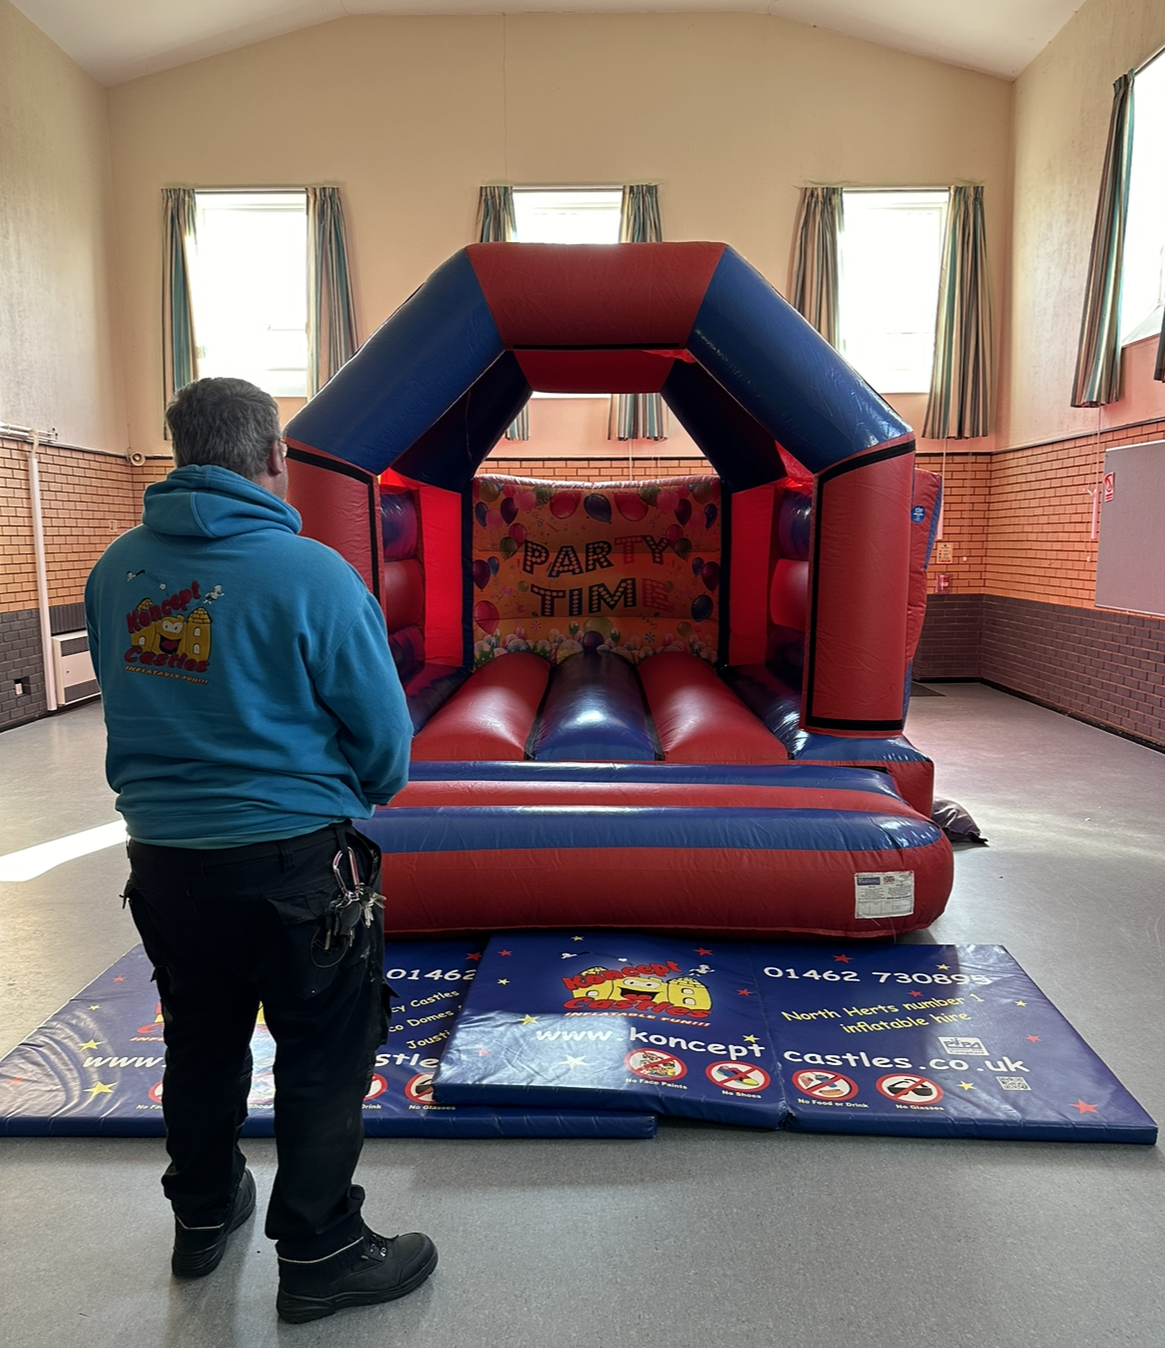 Koncept castle supervising the 12ft red and blue bouncy castle for a event. 